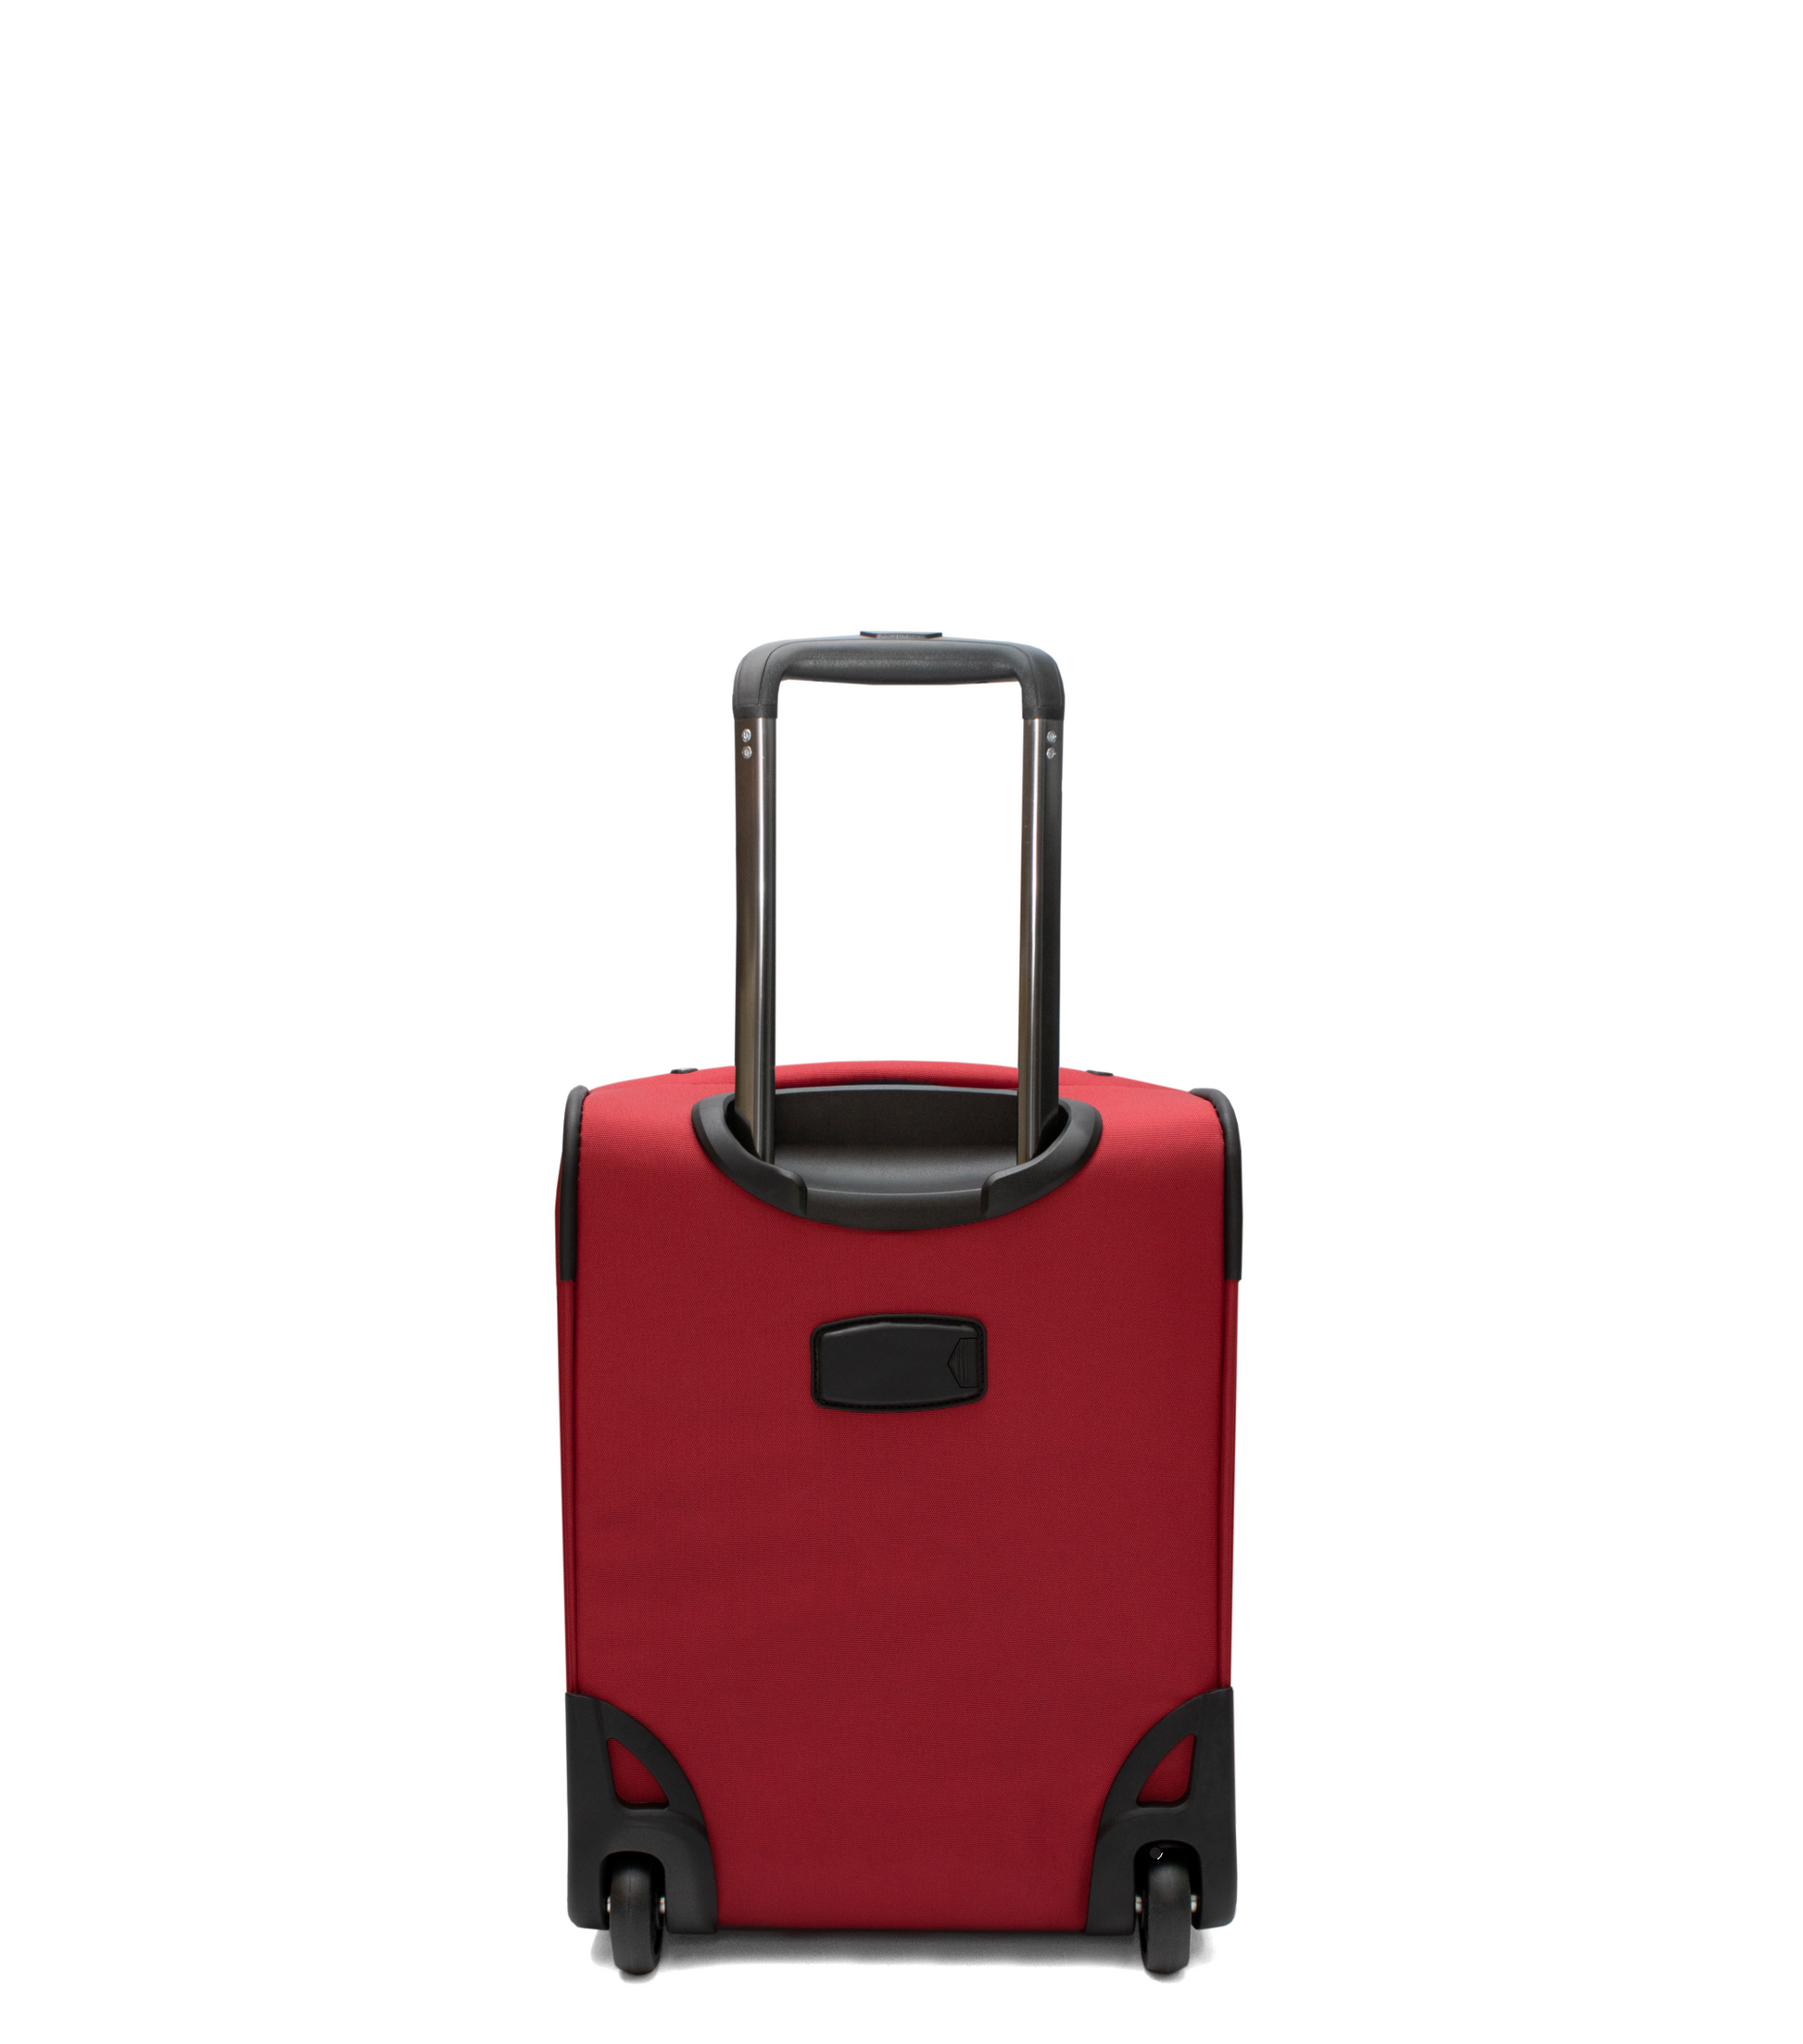 Cavalinho Carry-on Softside Cabin Luggage (16" or 19") - 16 inch Red - 68020003.04.16_3